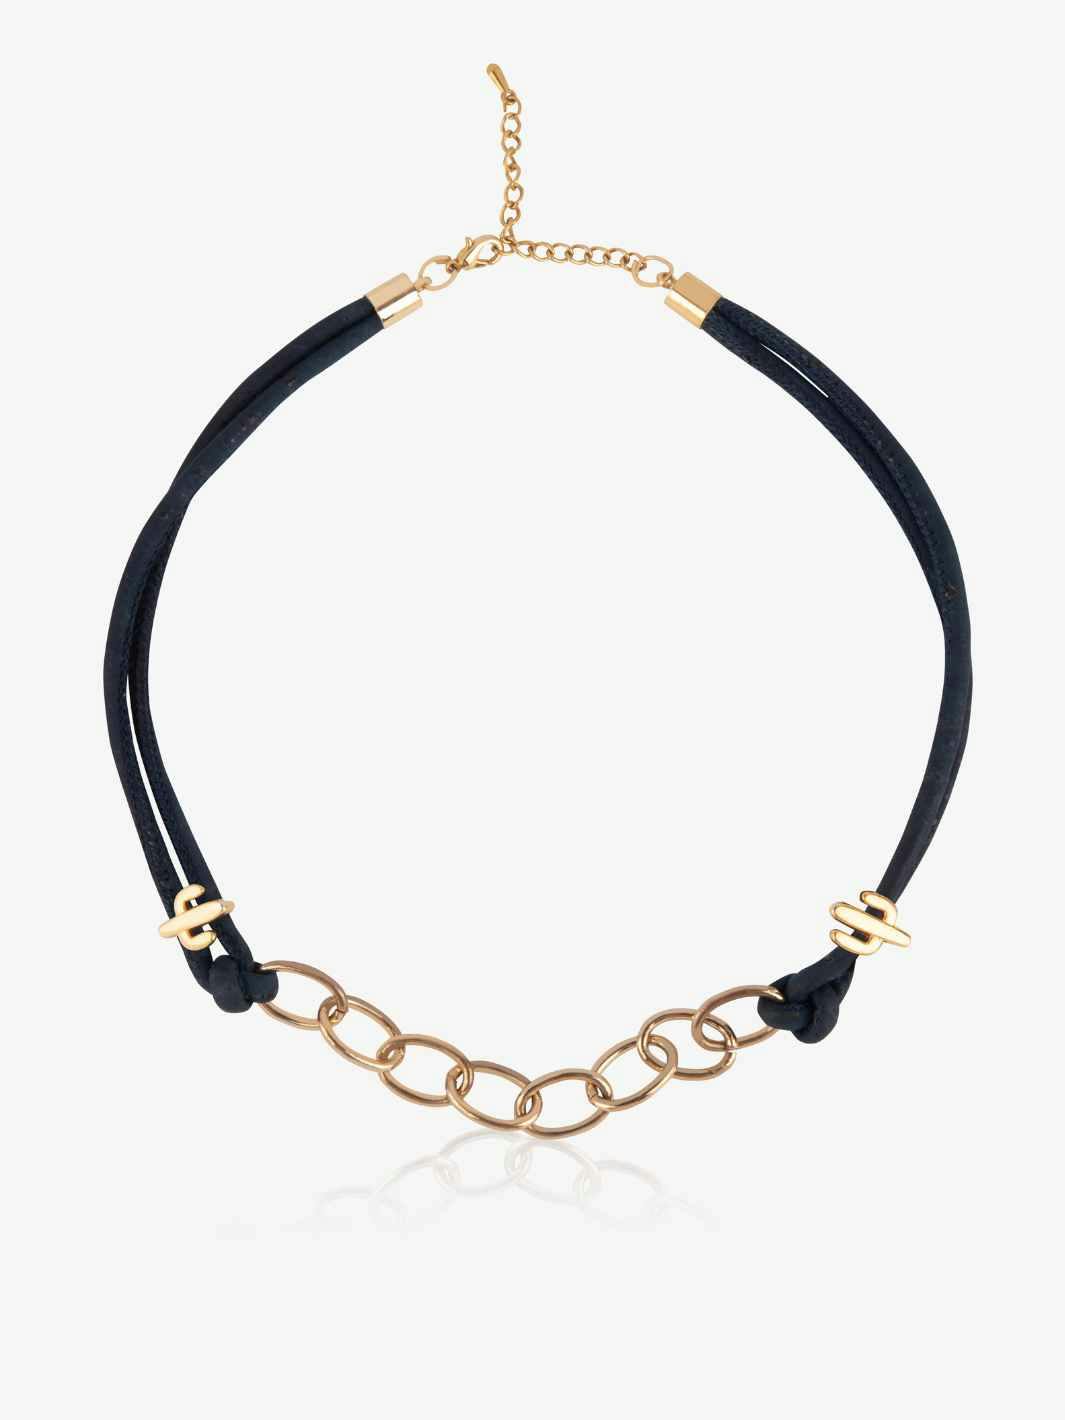 Arizona Bold Gold Necklace in Navy Blue, a product by FOReT®